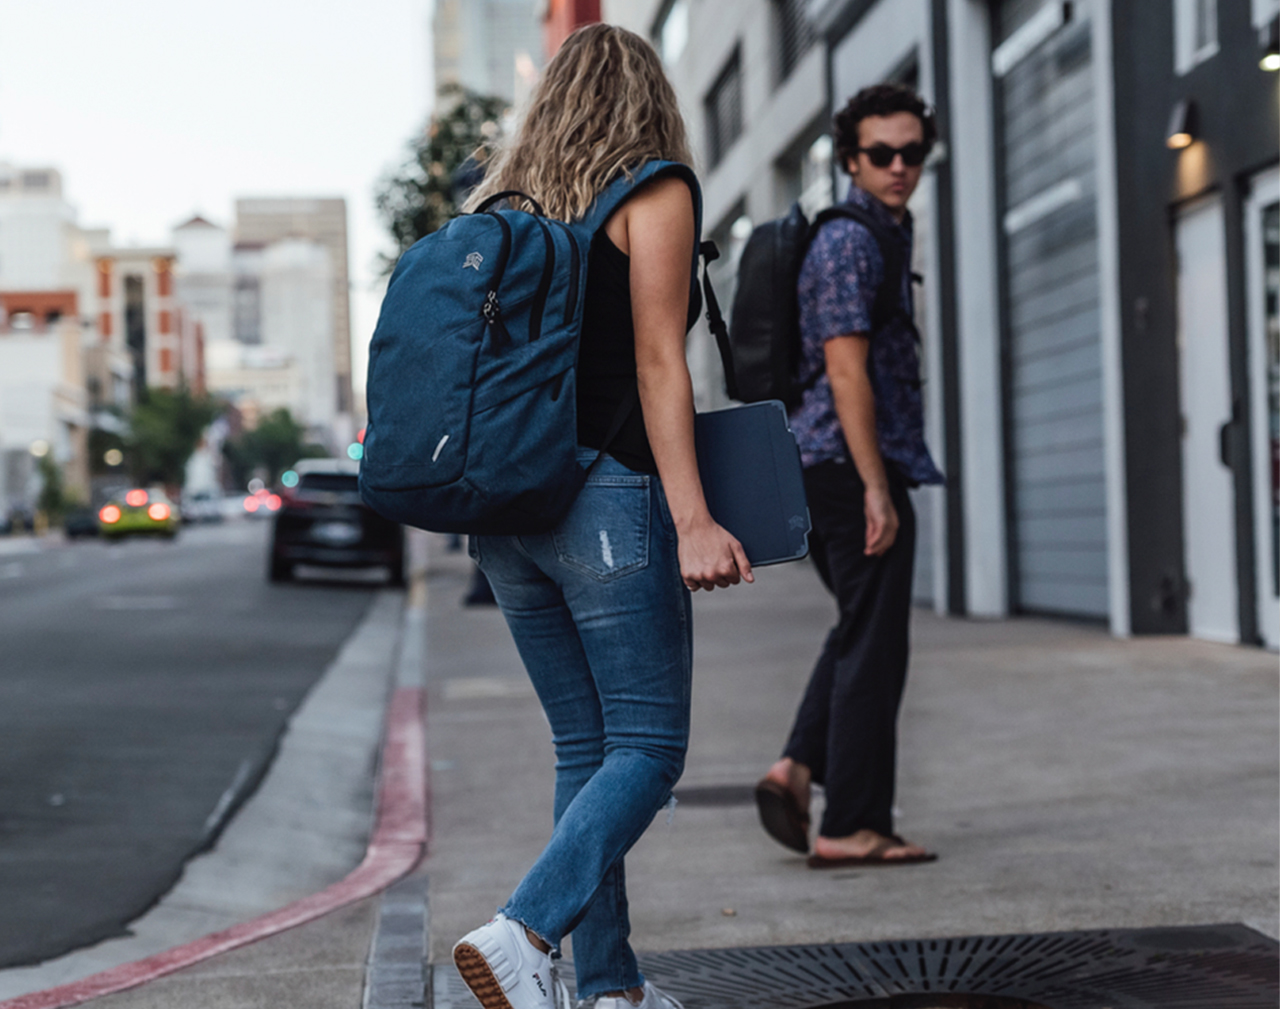 Two young people on street, with backpacks, one with laptop